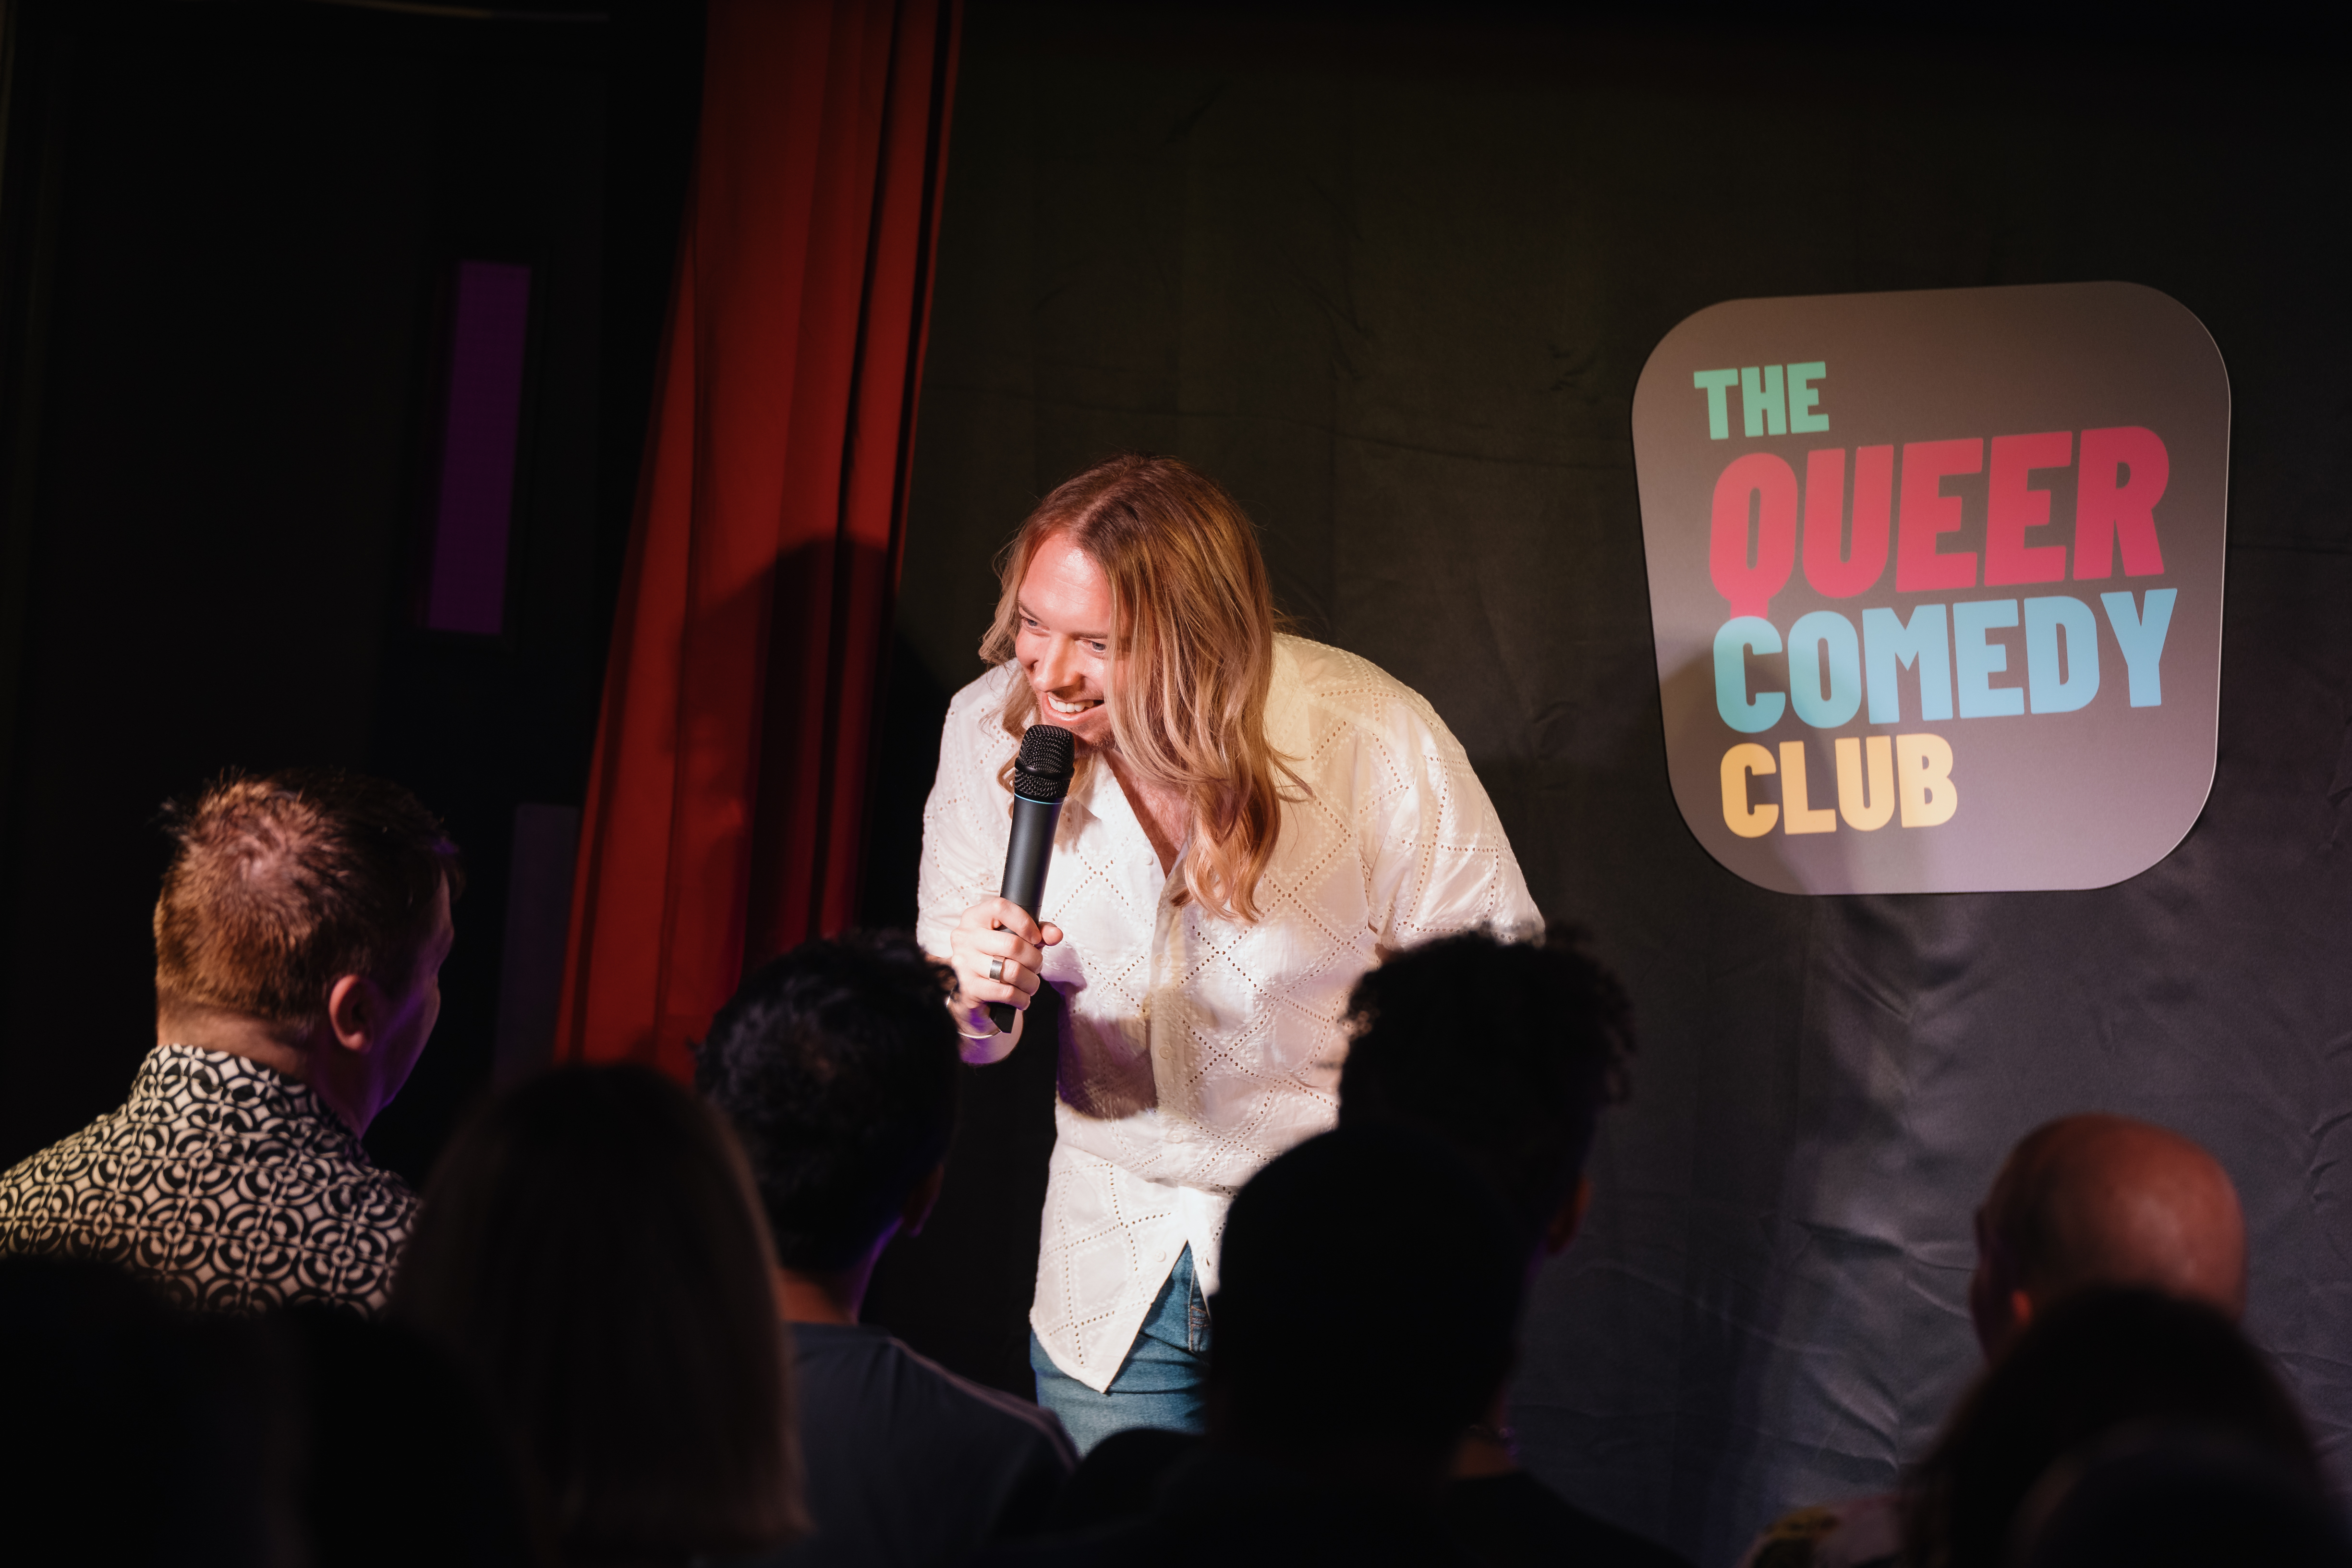 The Queer Comedy Club